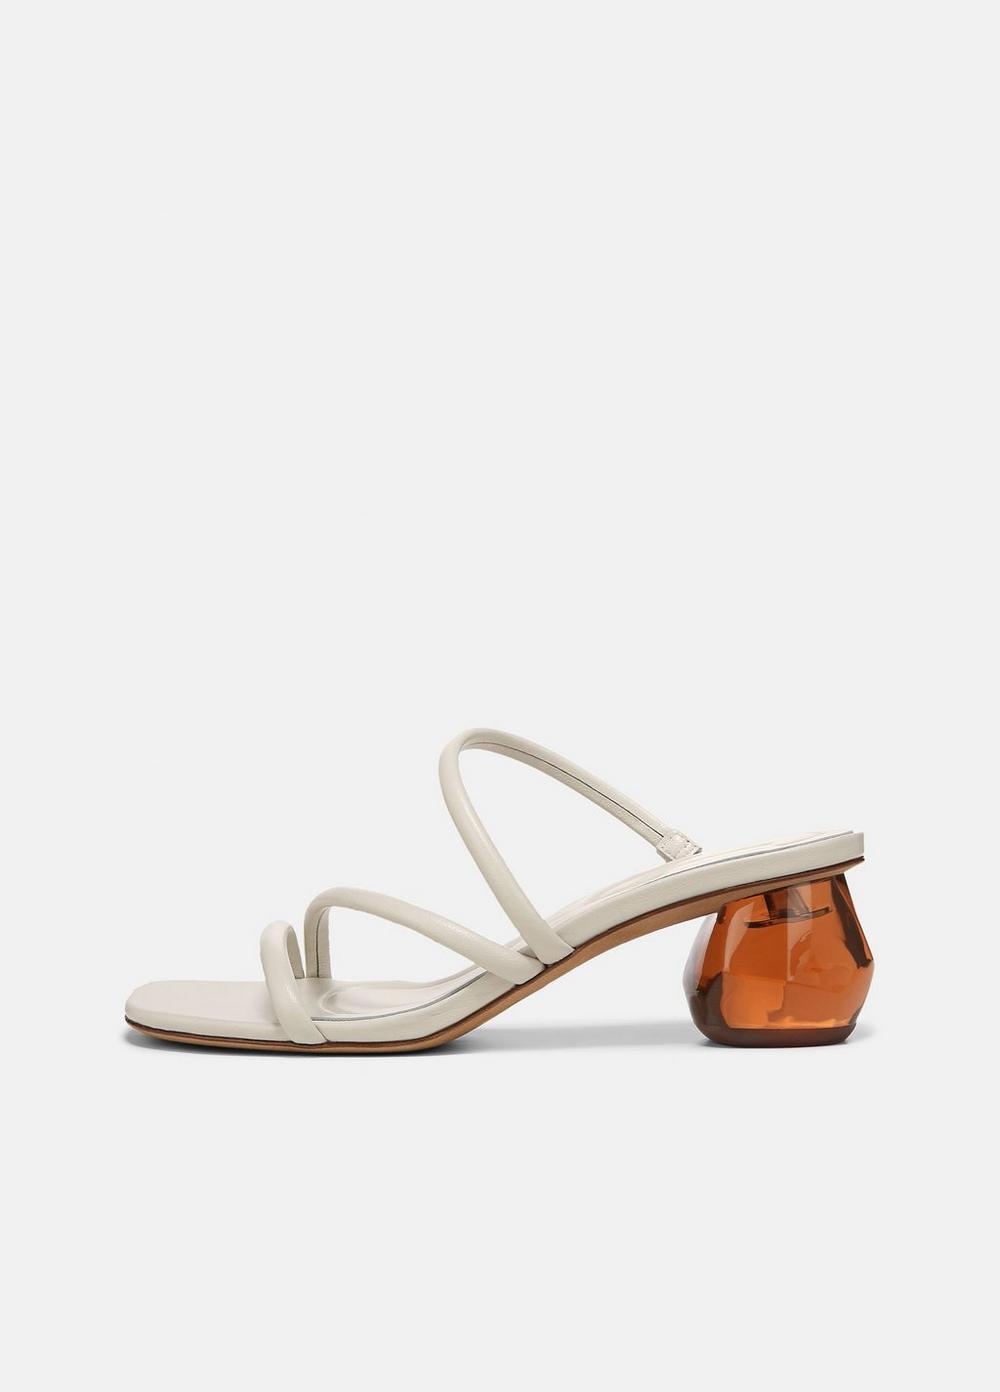 Vince Pedra Leather Sandal in White | Lyst